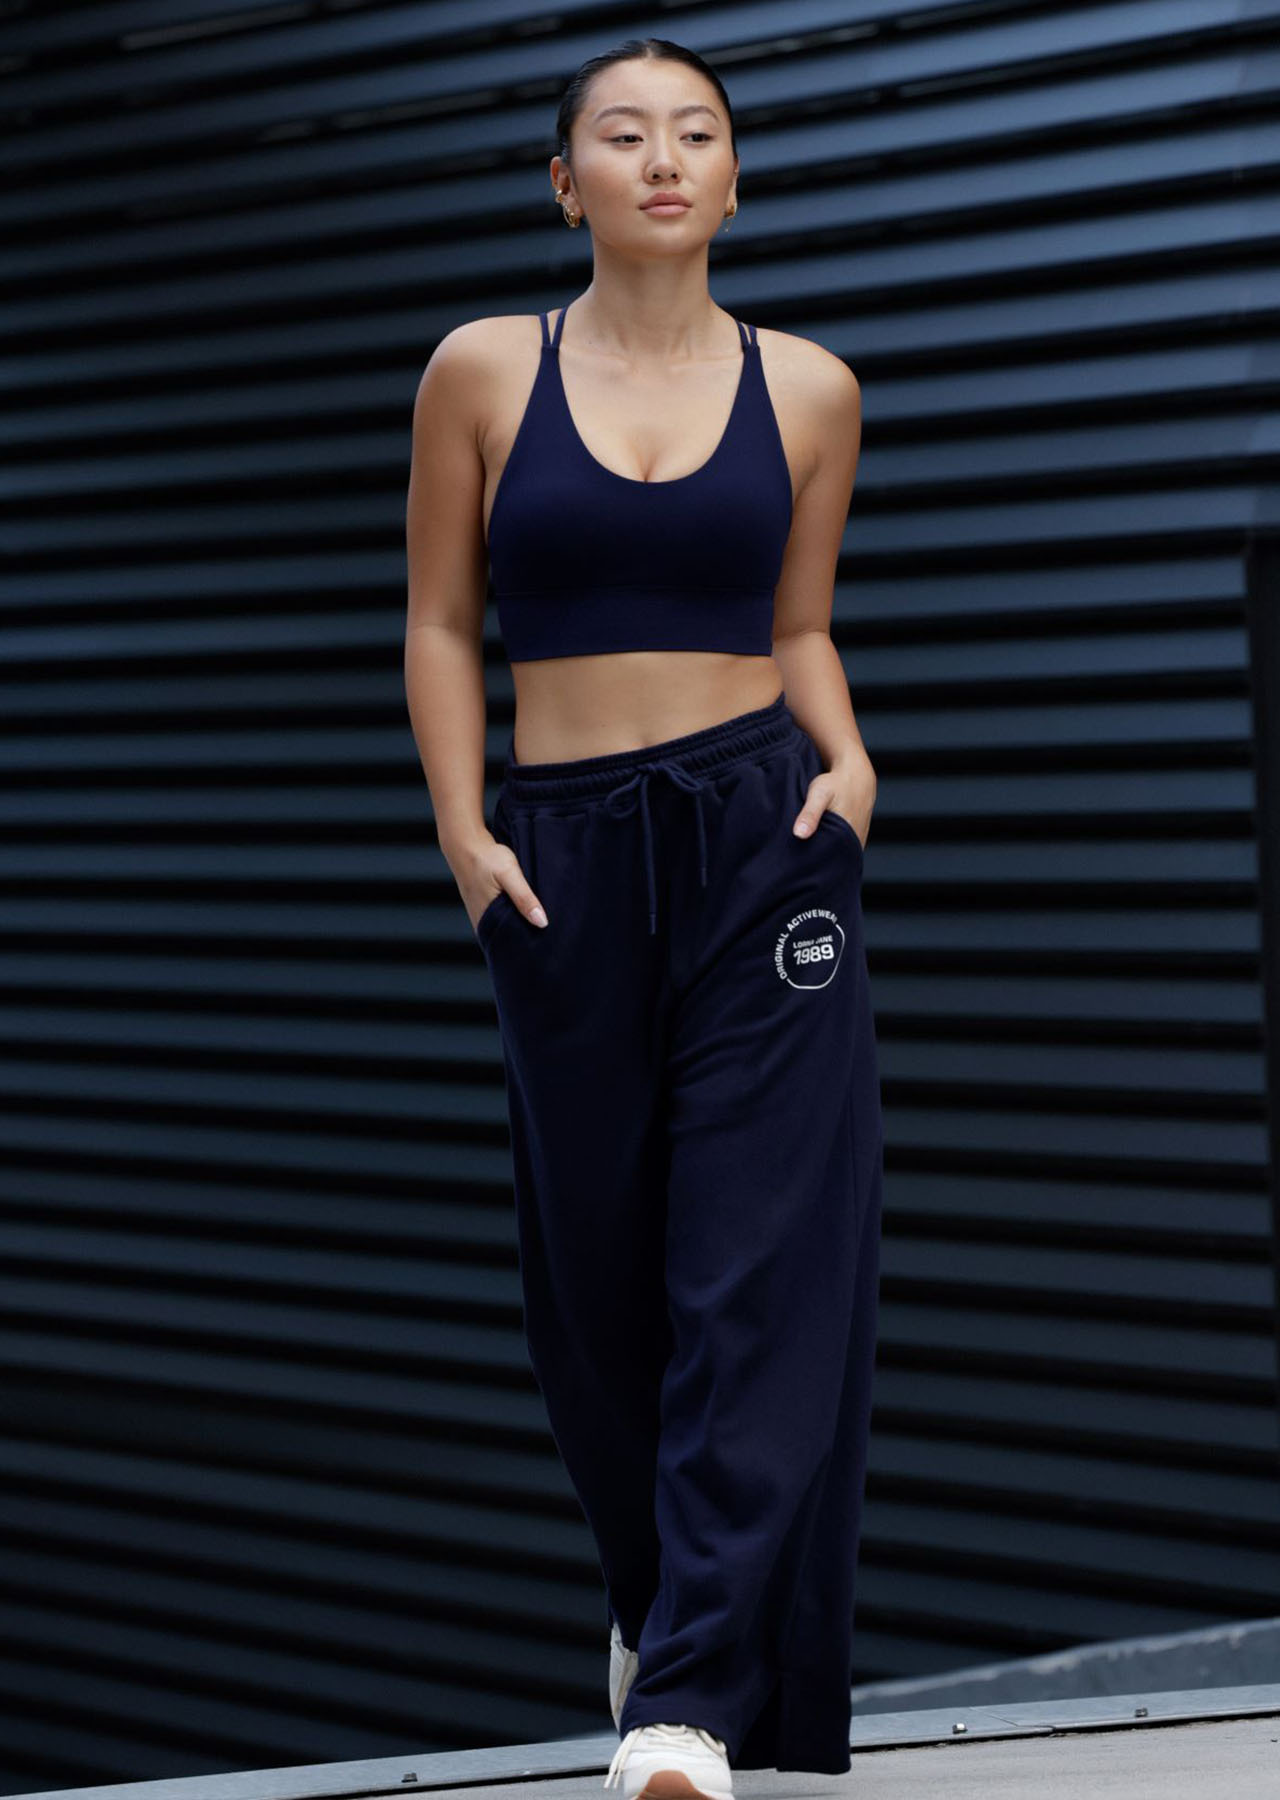 Slouchy Crop Trouser – The Reset